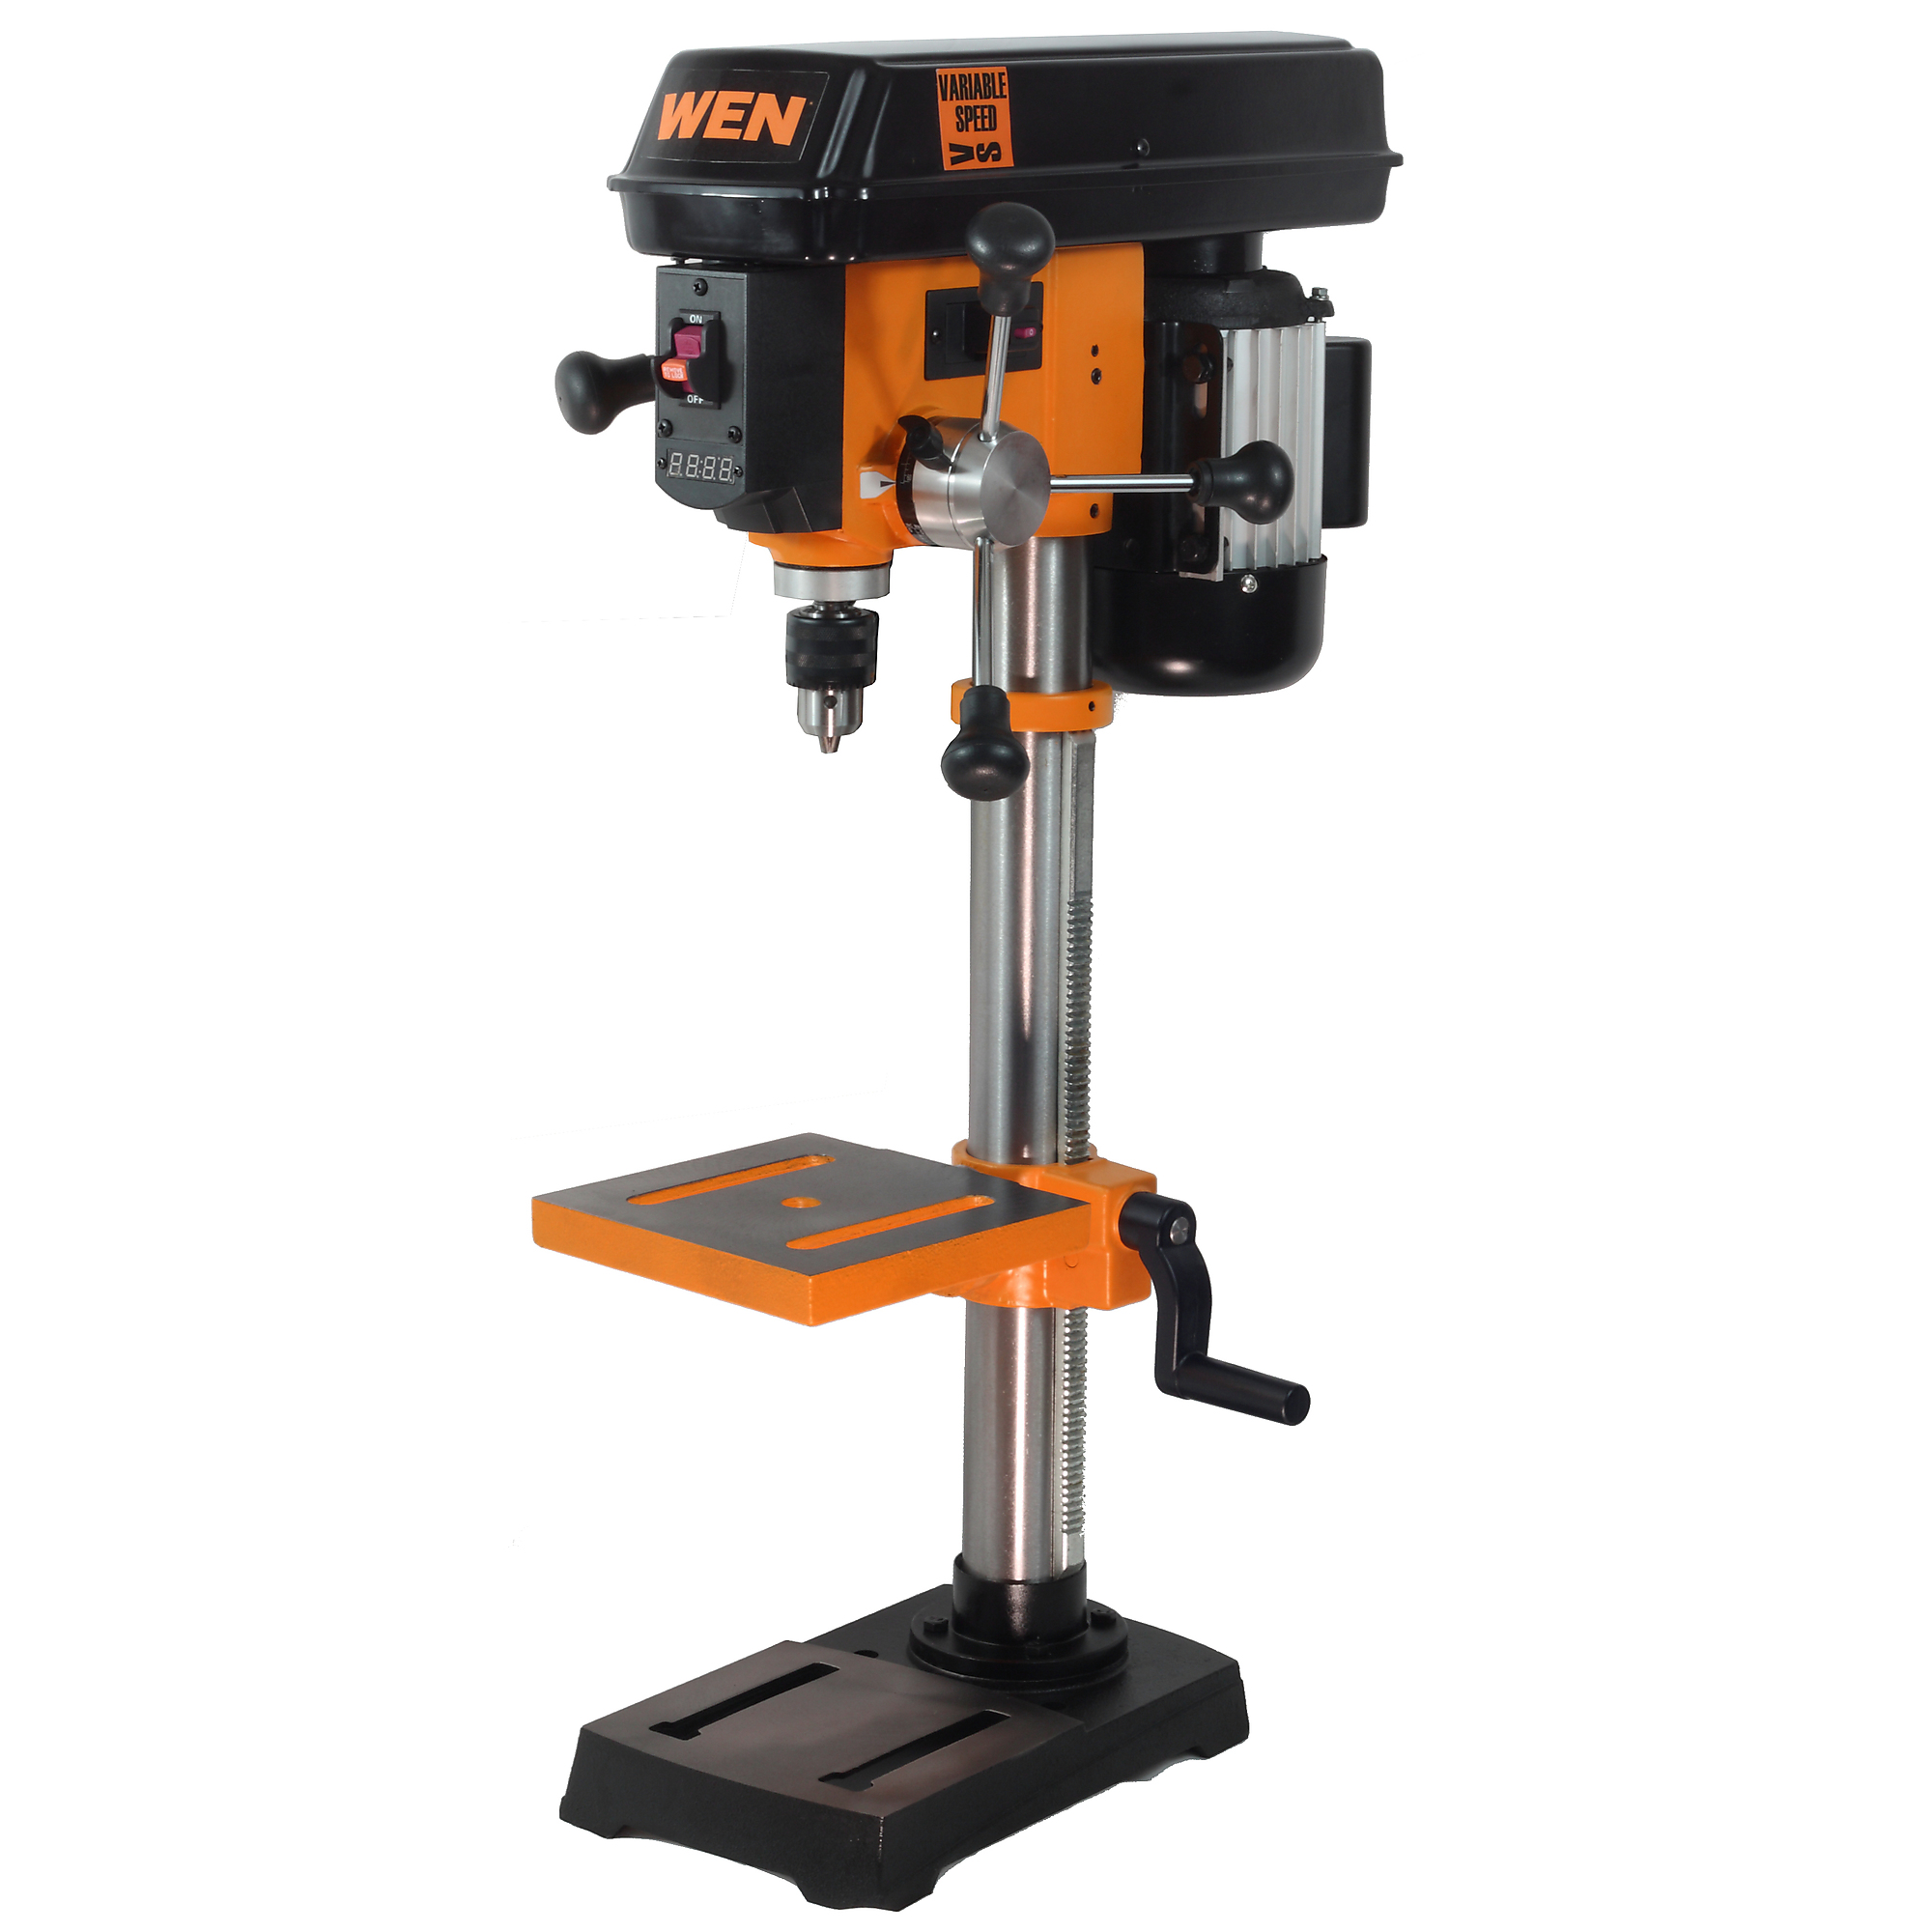 WEN, 10Inch Variable Speed Cast Iron Benchtop Drill Press, Chuck Size 0.5 in, Horsepower 0.8 Model 4212T